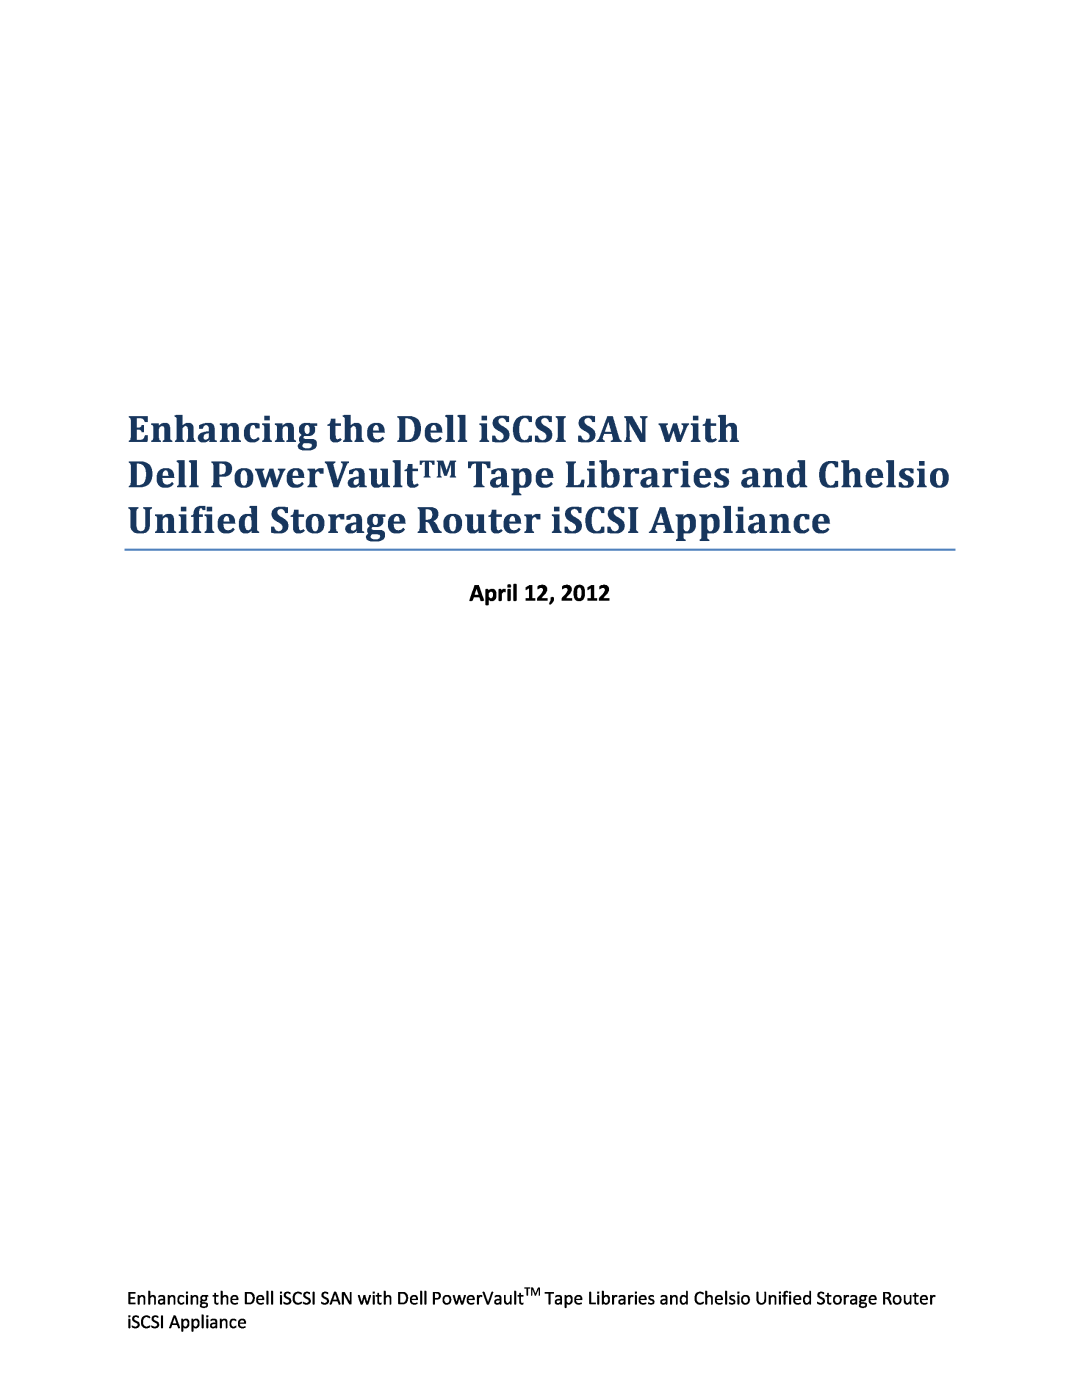 Dell Chelsio USR SAS-to-iSCSI Appliance manual Enhancing the Dell iSCSI SAN with, April 12 